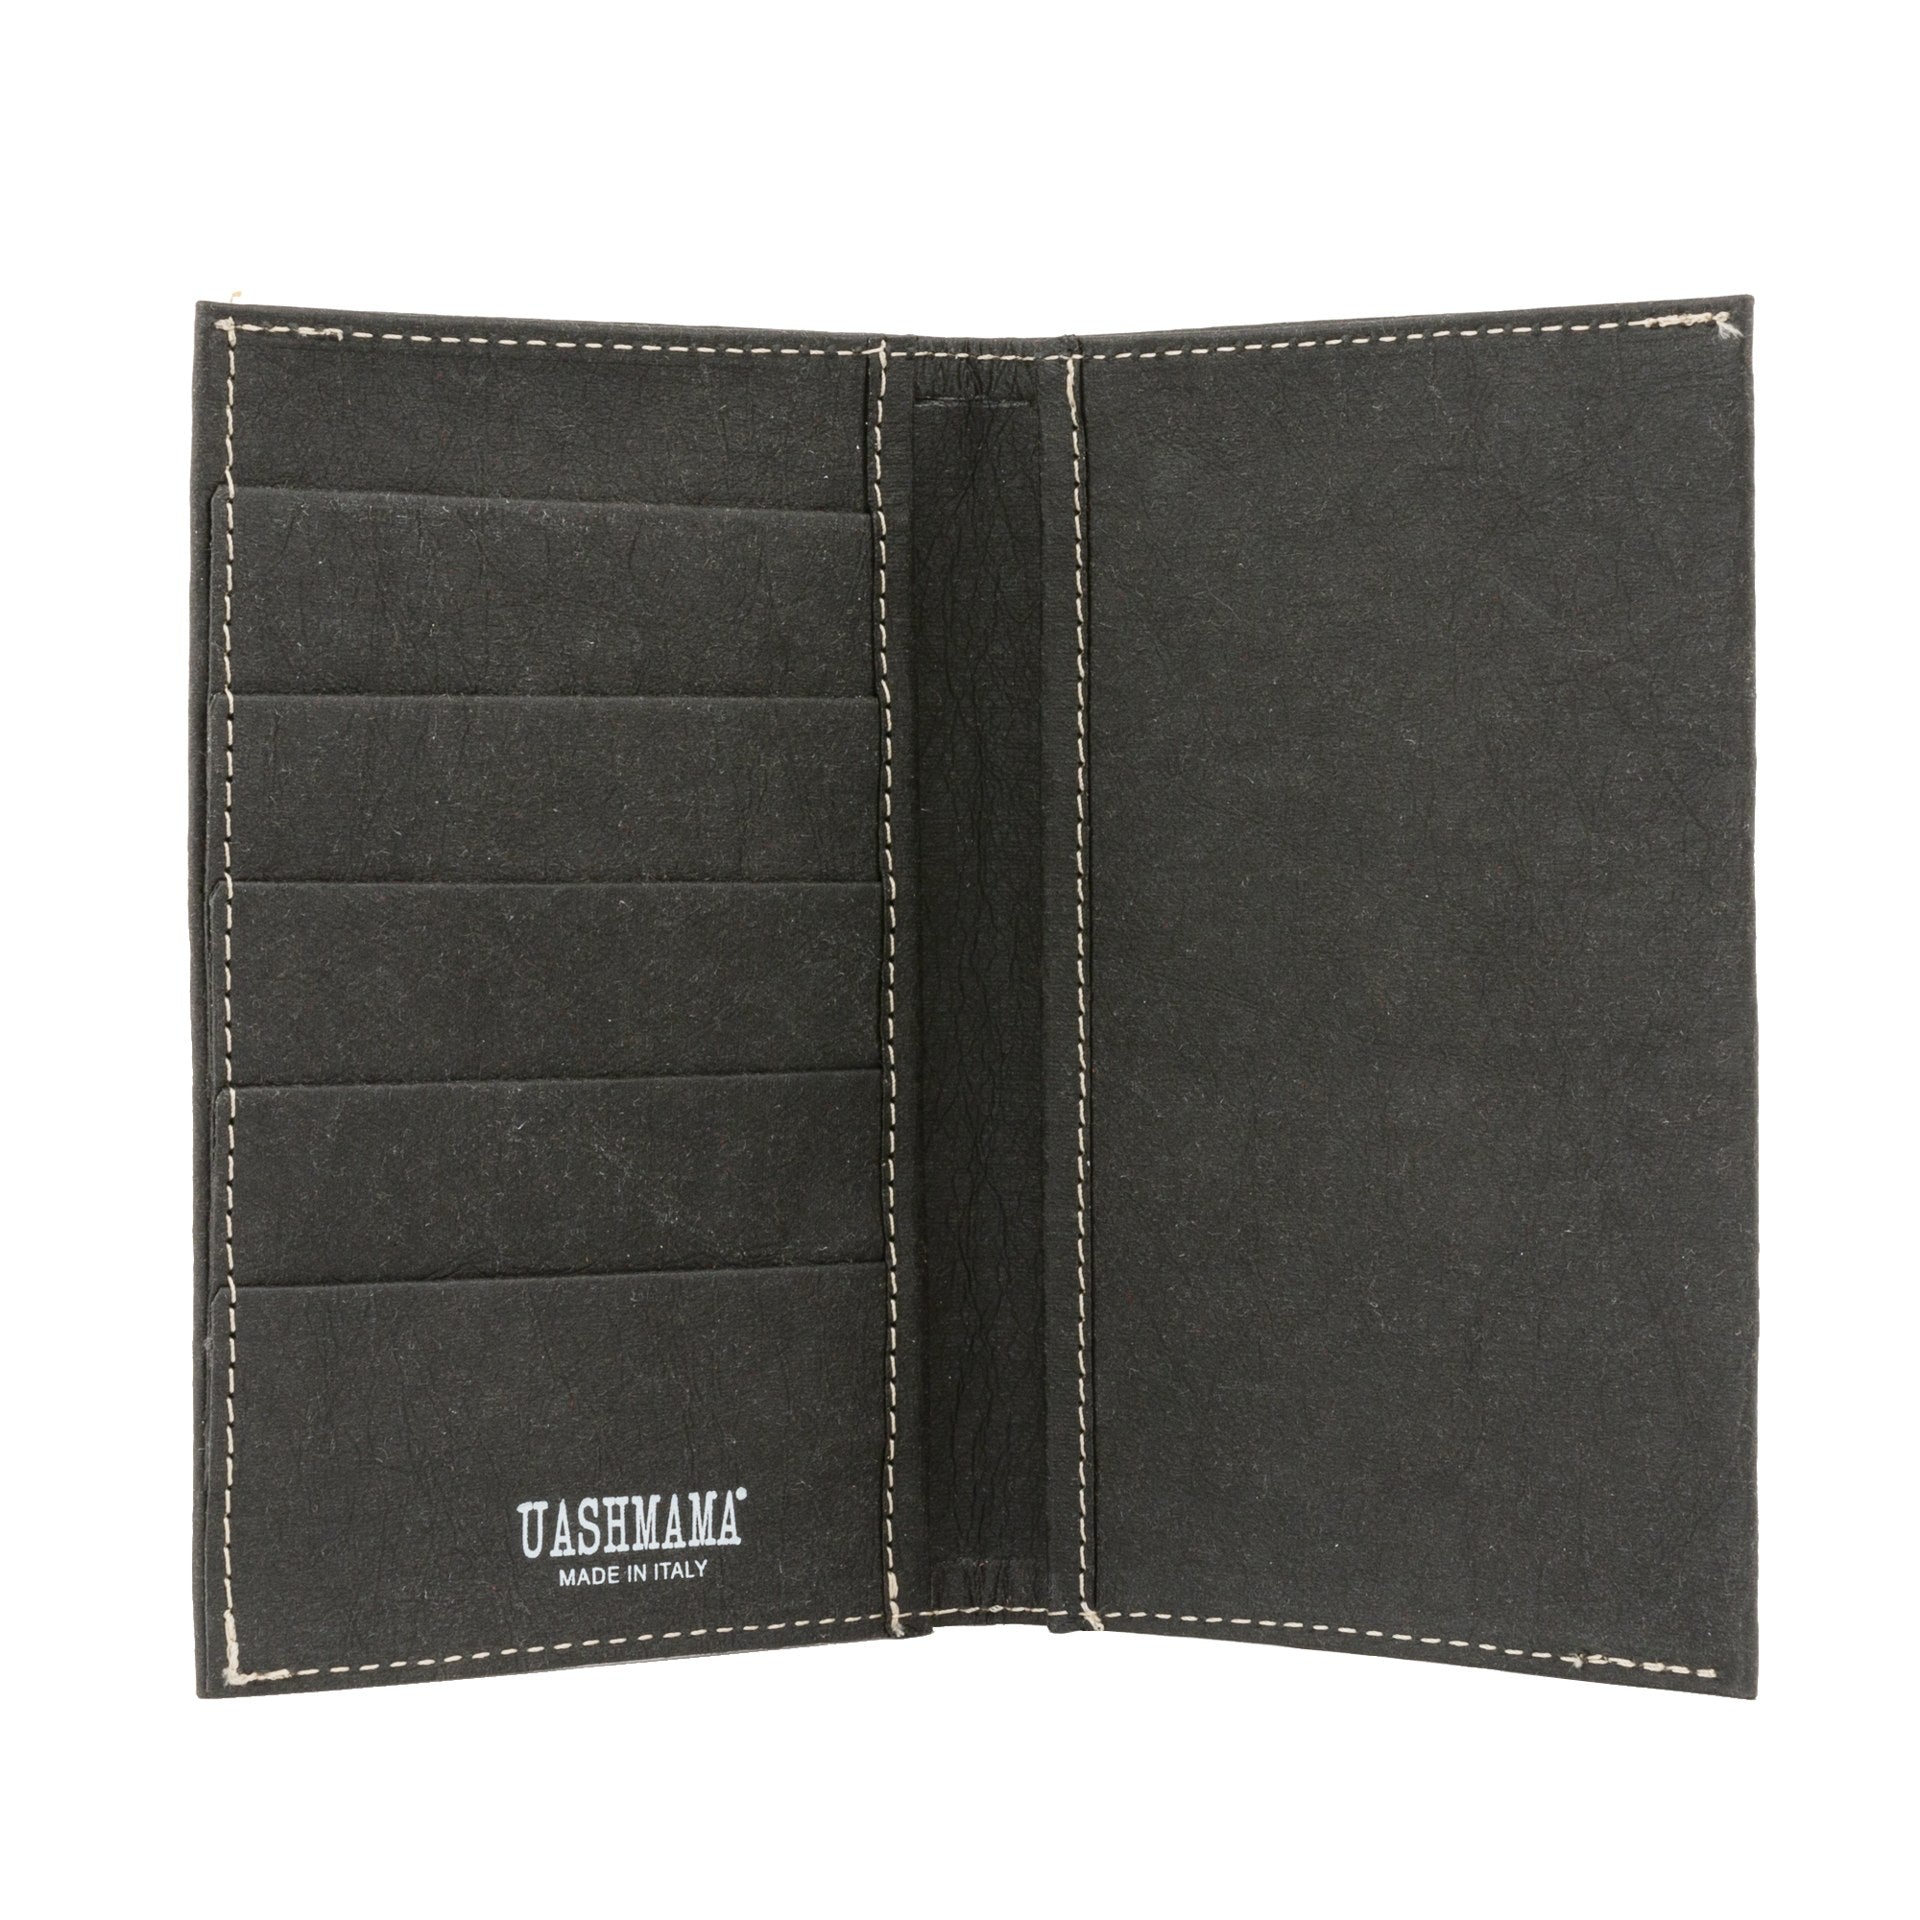 A washable paper large wallet is shown open. On the left hand side are 5 credit card slots. On the right hand side is one large pocket. The UASHMAMA logo is shown on the bottom left of the wallet. The colour of the wallet is black.